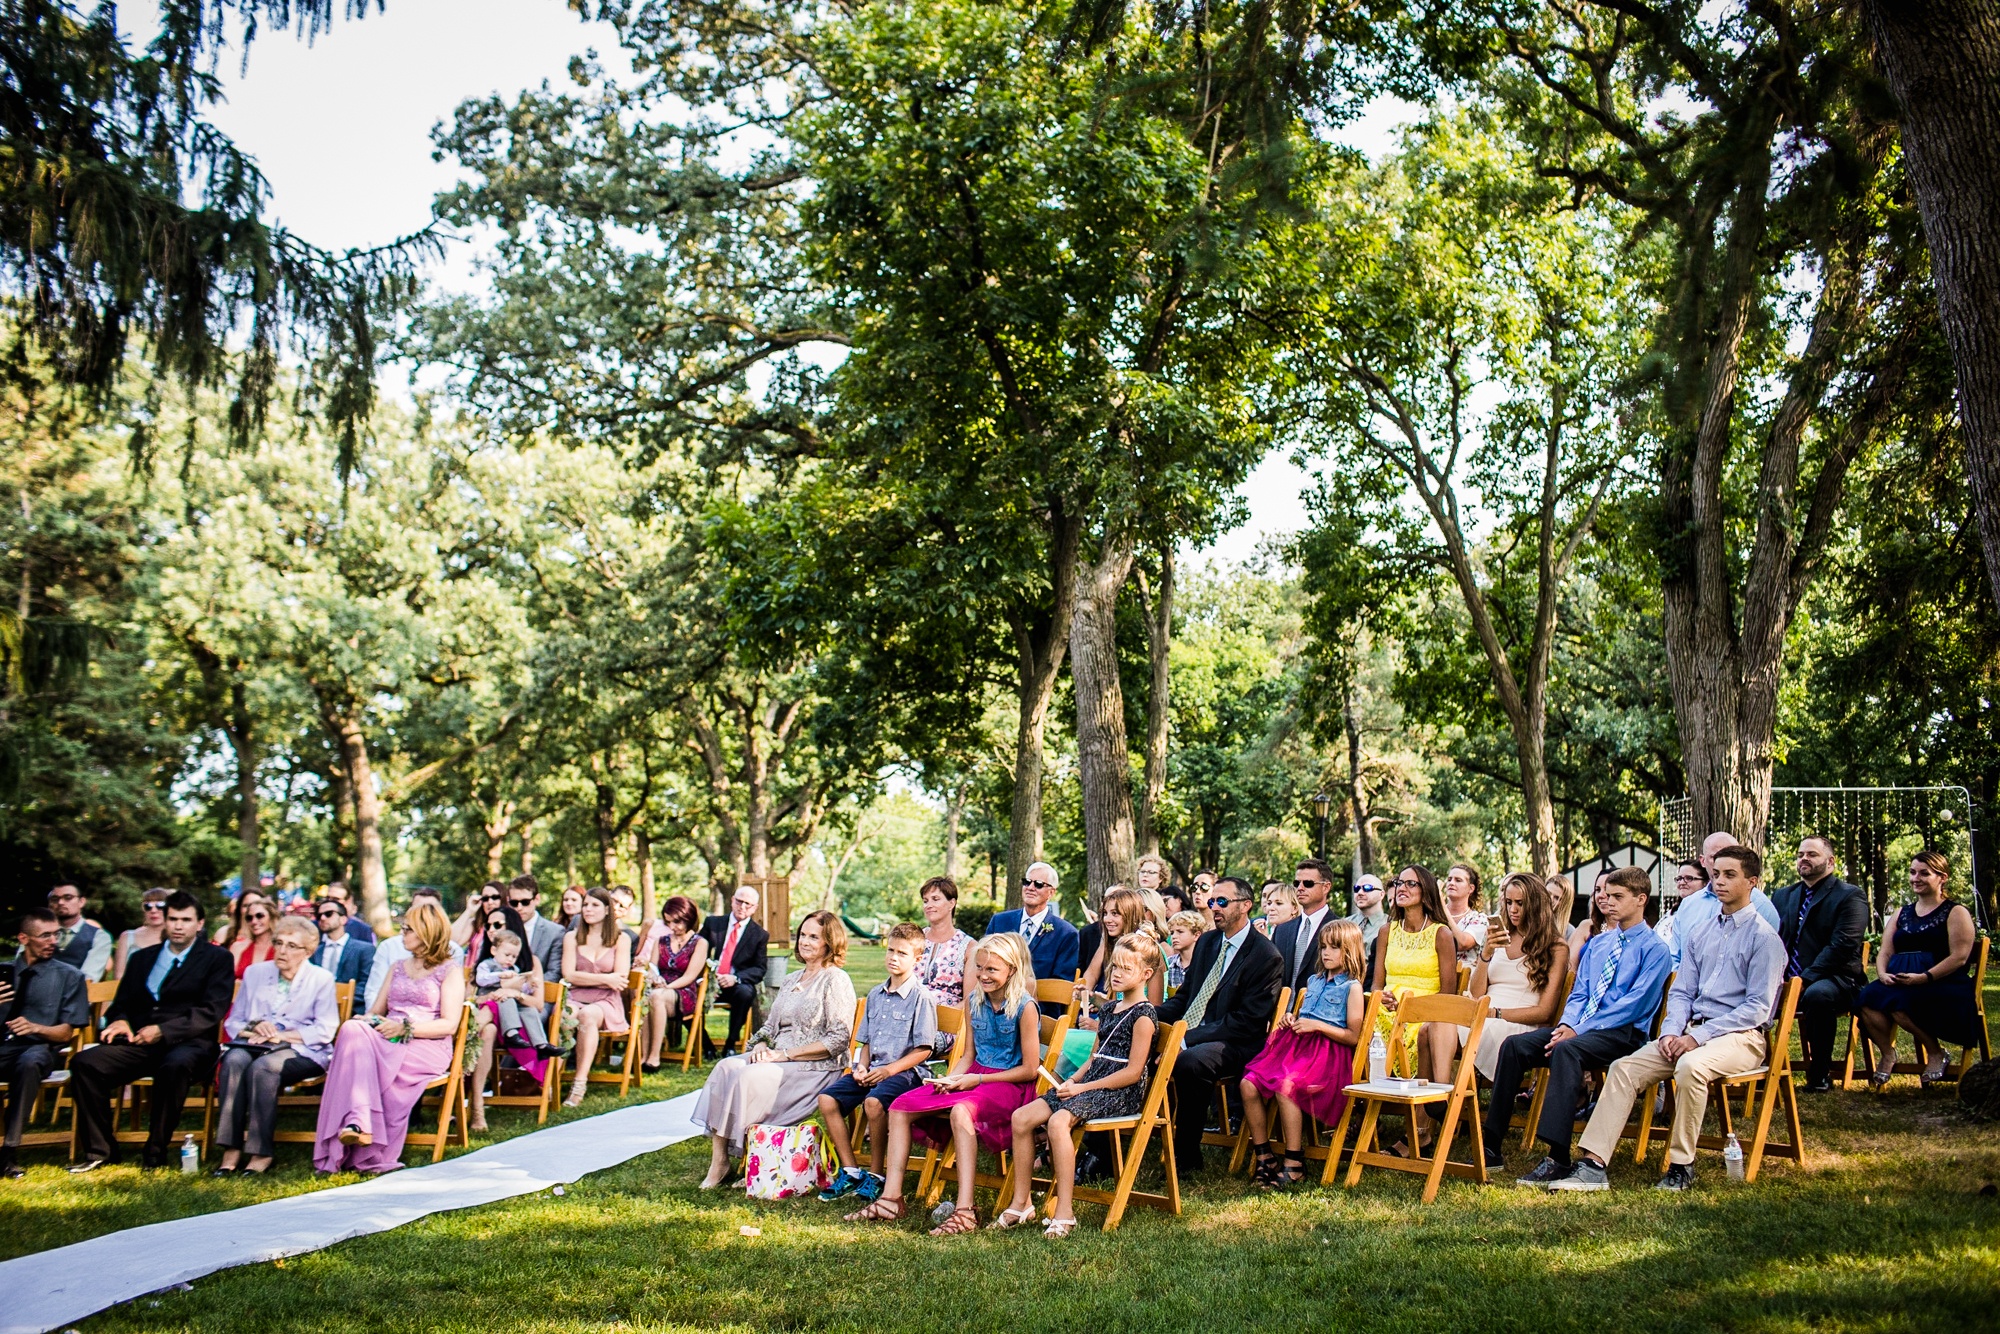 Guests watch a ceremony at a Katherine Legge Memorial lodge wedding